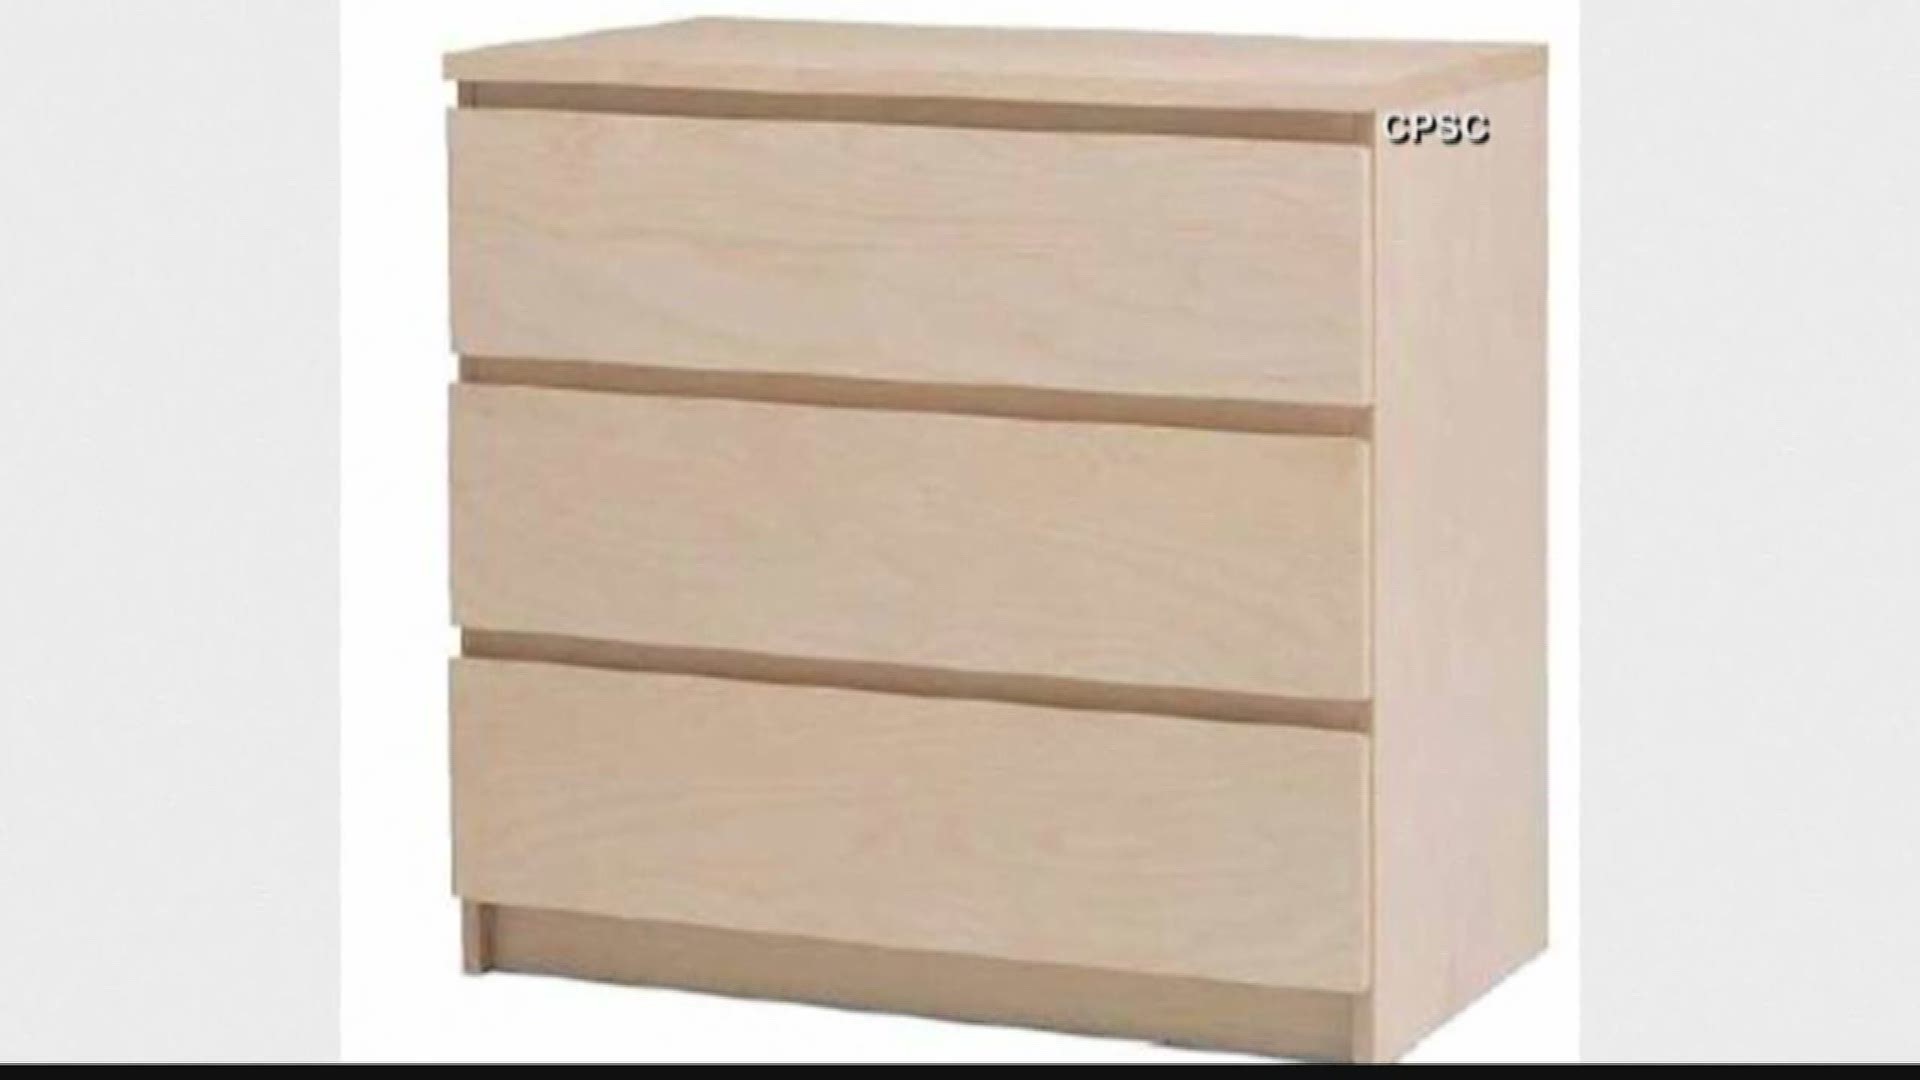 Ikea Again Announces Dresser Recall After Death Of 8th Child